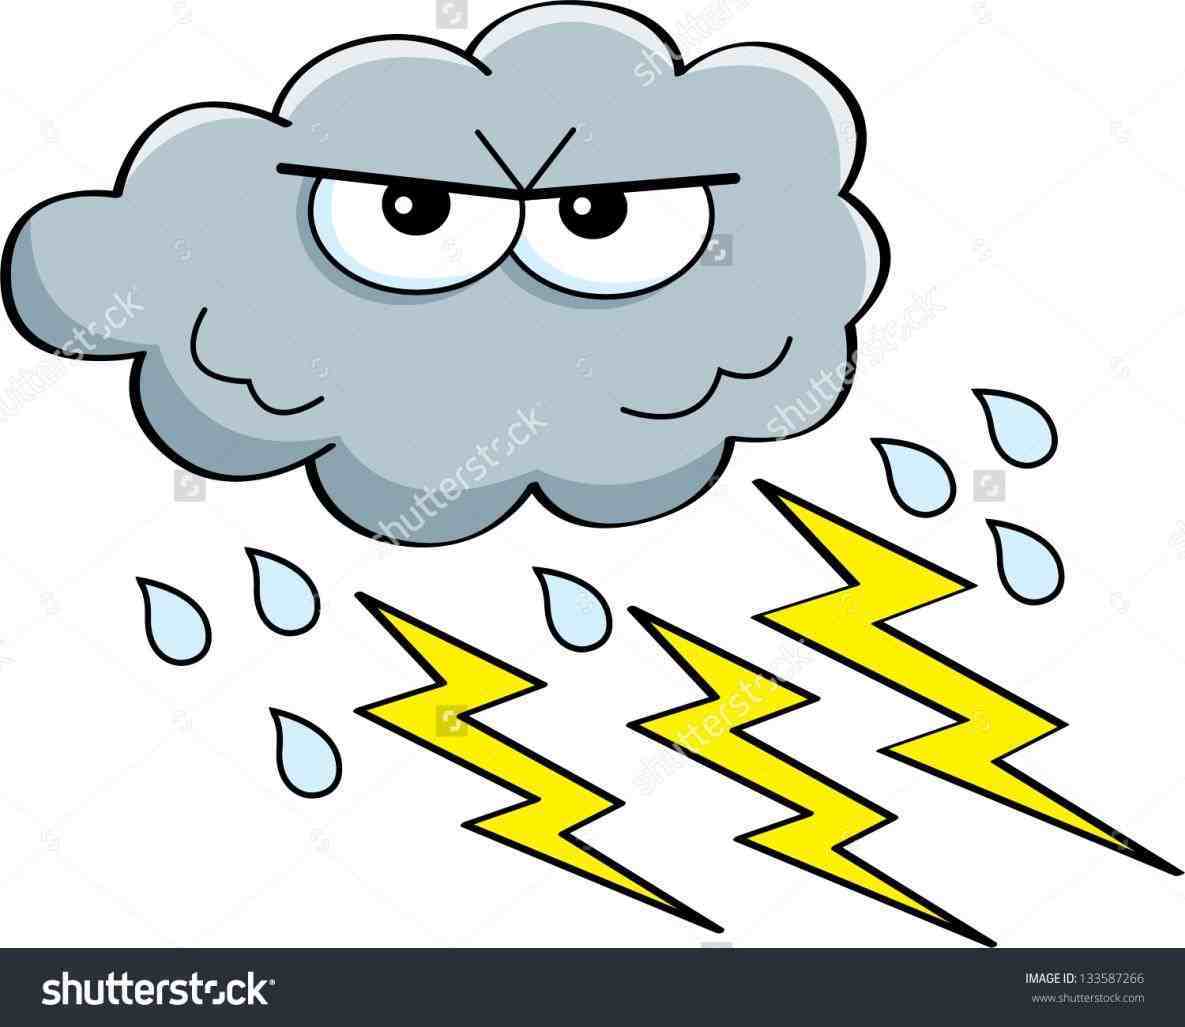 And in color lightening lighting storm clipart clipart thunderstorm cloud  pencil and in color lightning storm